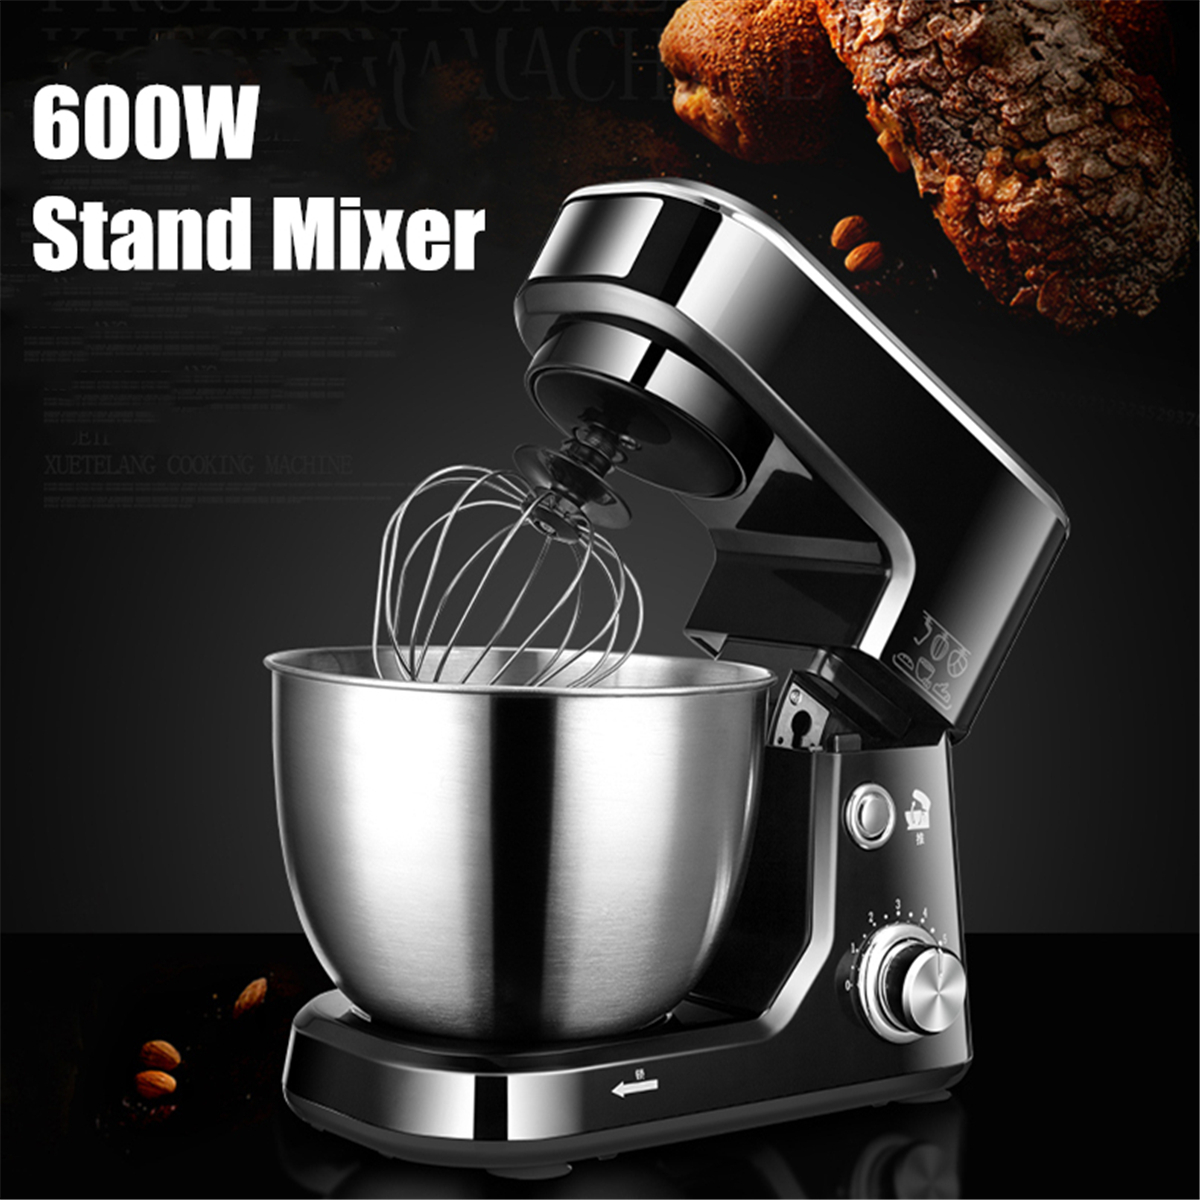 Automatic Mini Egg Beater Stand Mixer Multifunctional 4L Capacity 600W Power Motor Egg Blender 220V 50Hz Tilt Head W Bowl with handle Motor Over-Tempe 17